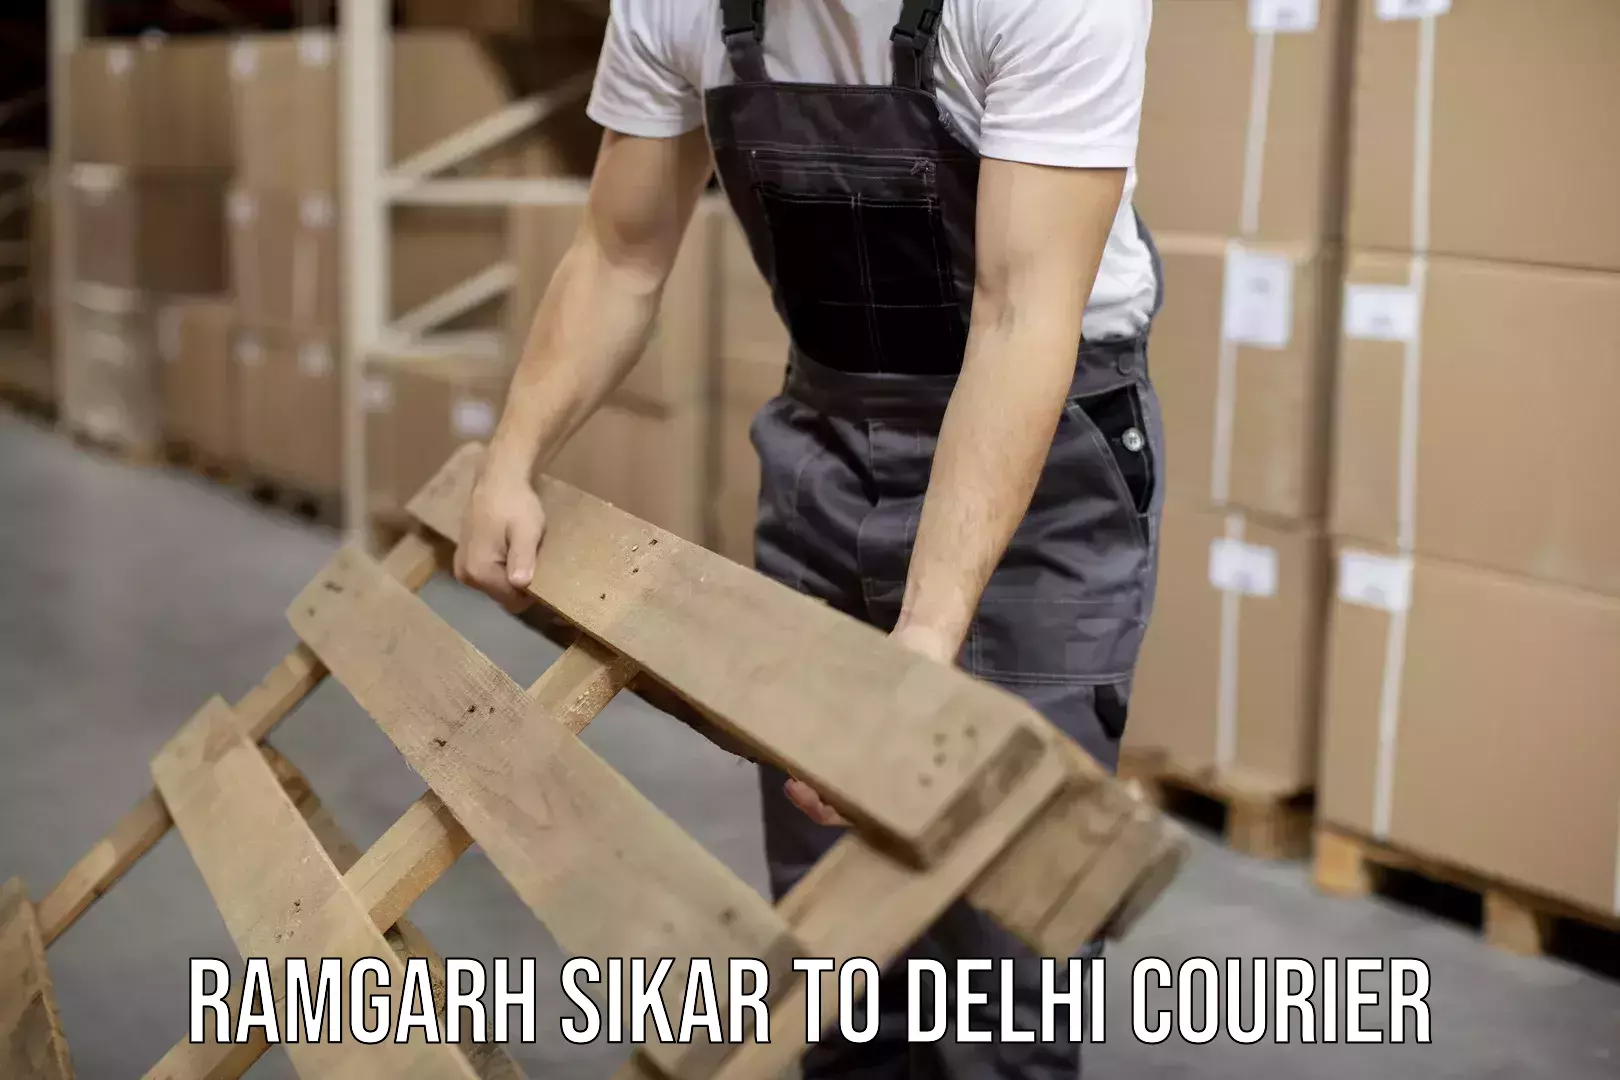 Next-generation courier services Ramgarh Sikar to Lodhi Road